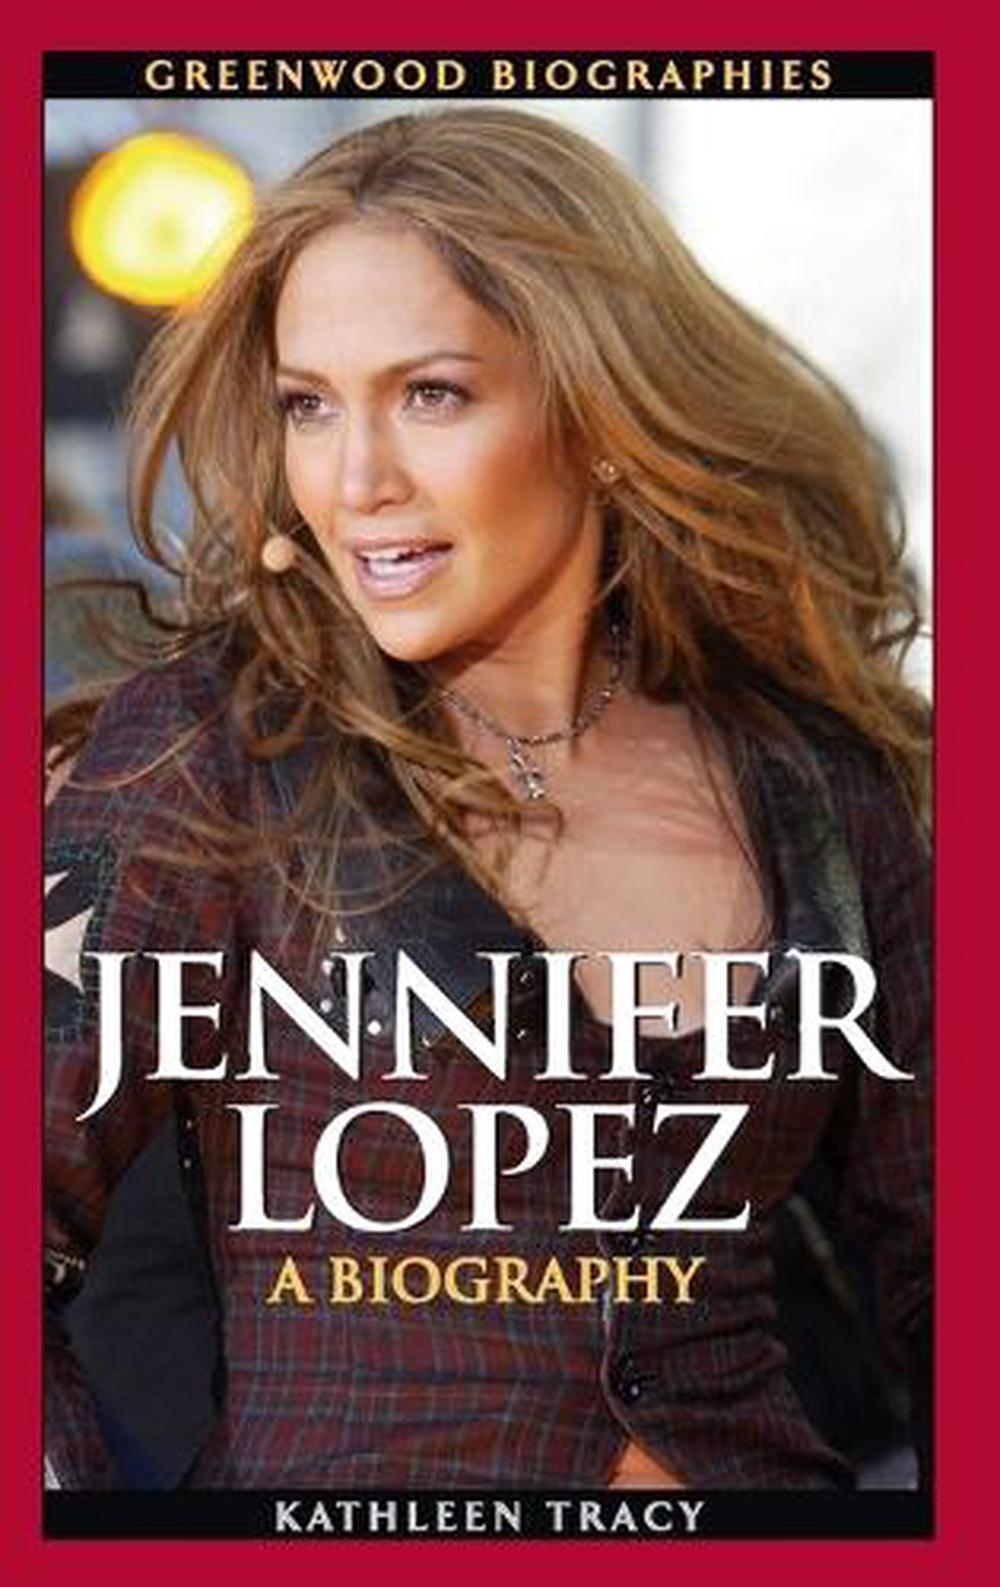 Jennifer Lopez A Biography by Kathleen Tracy (English) Hardcover Book